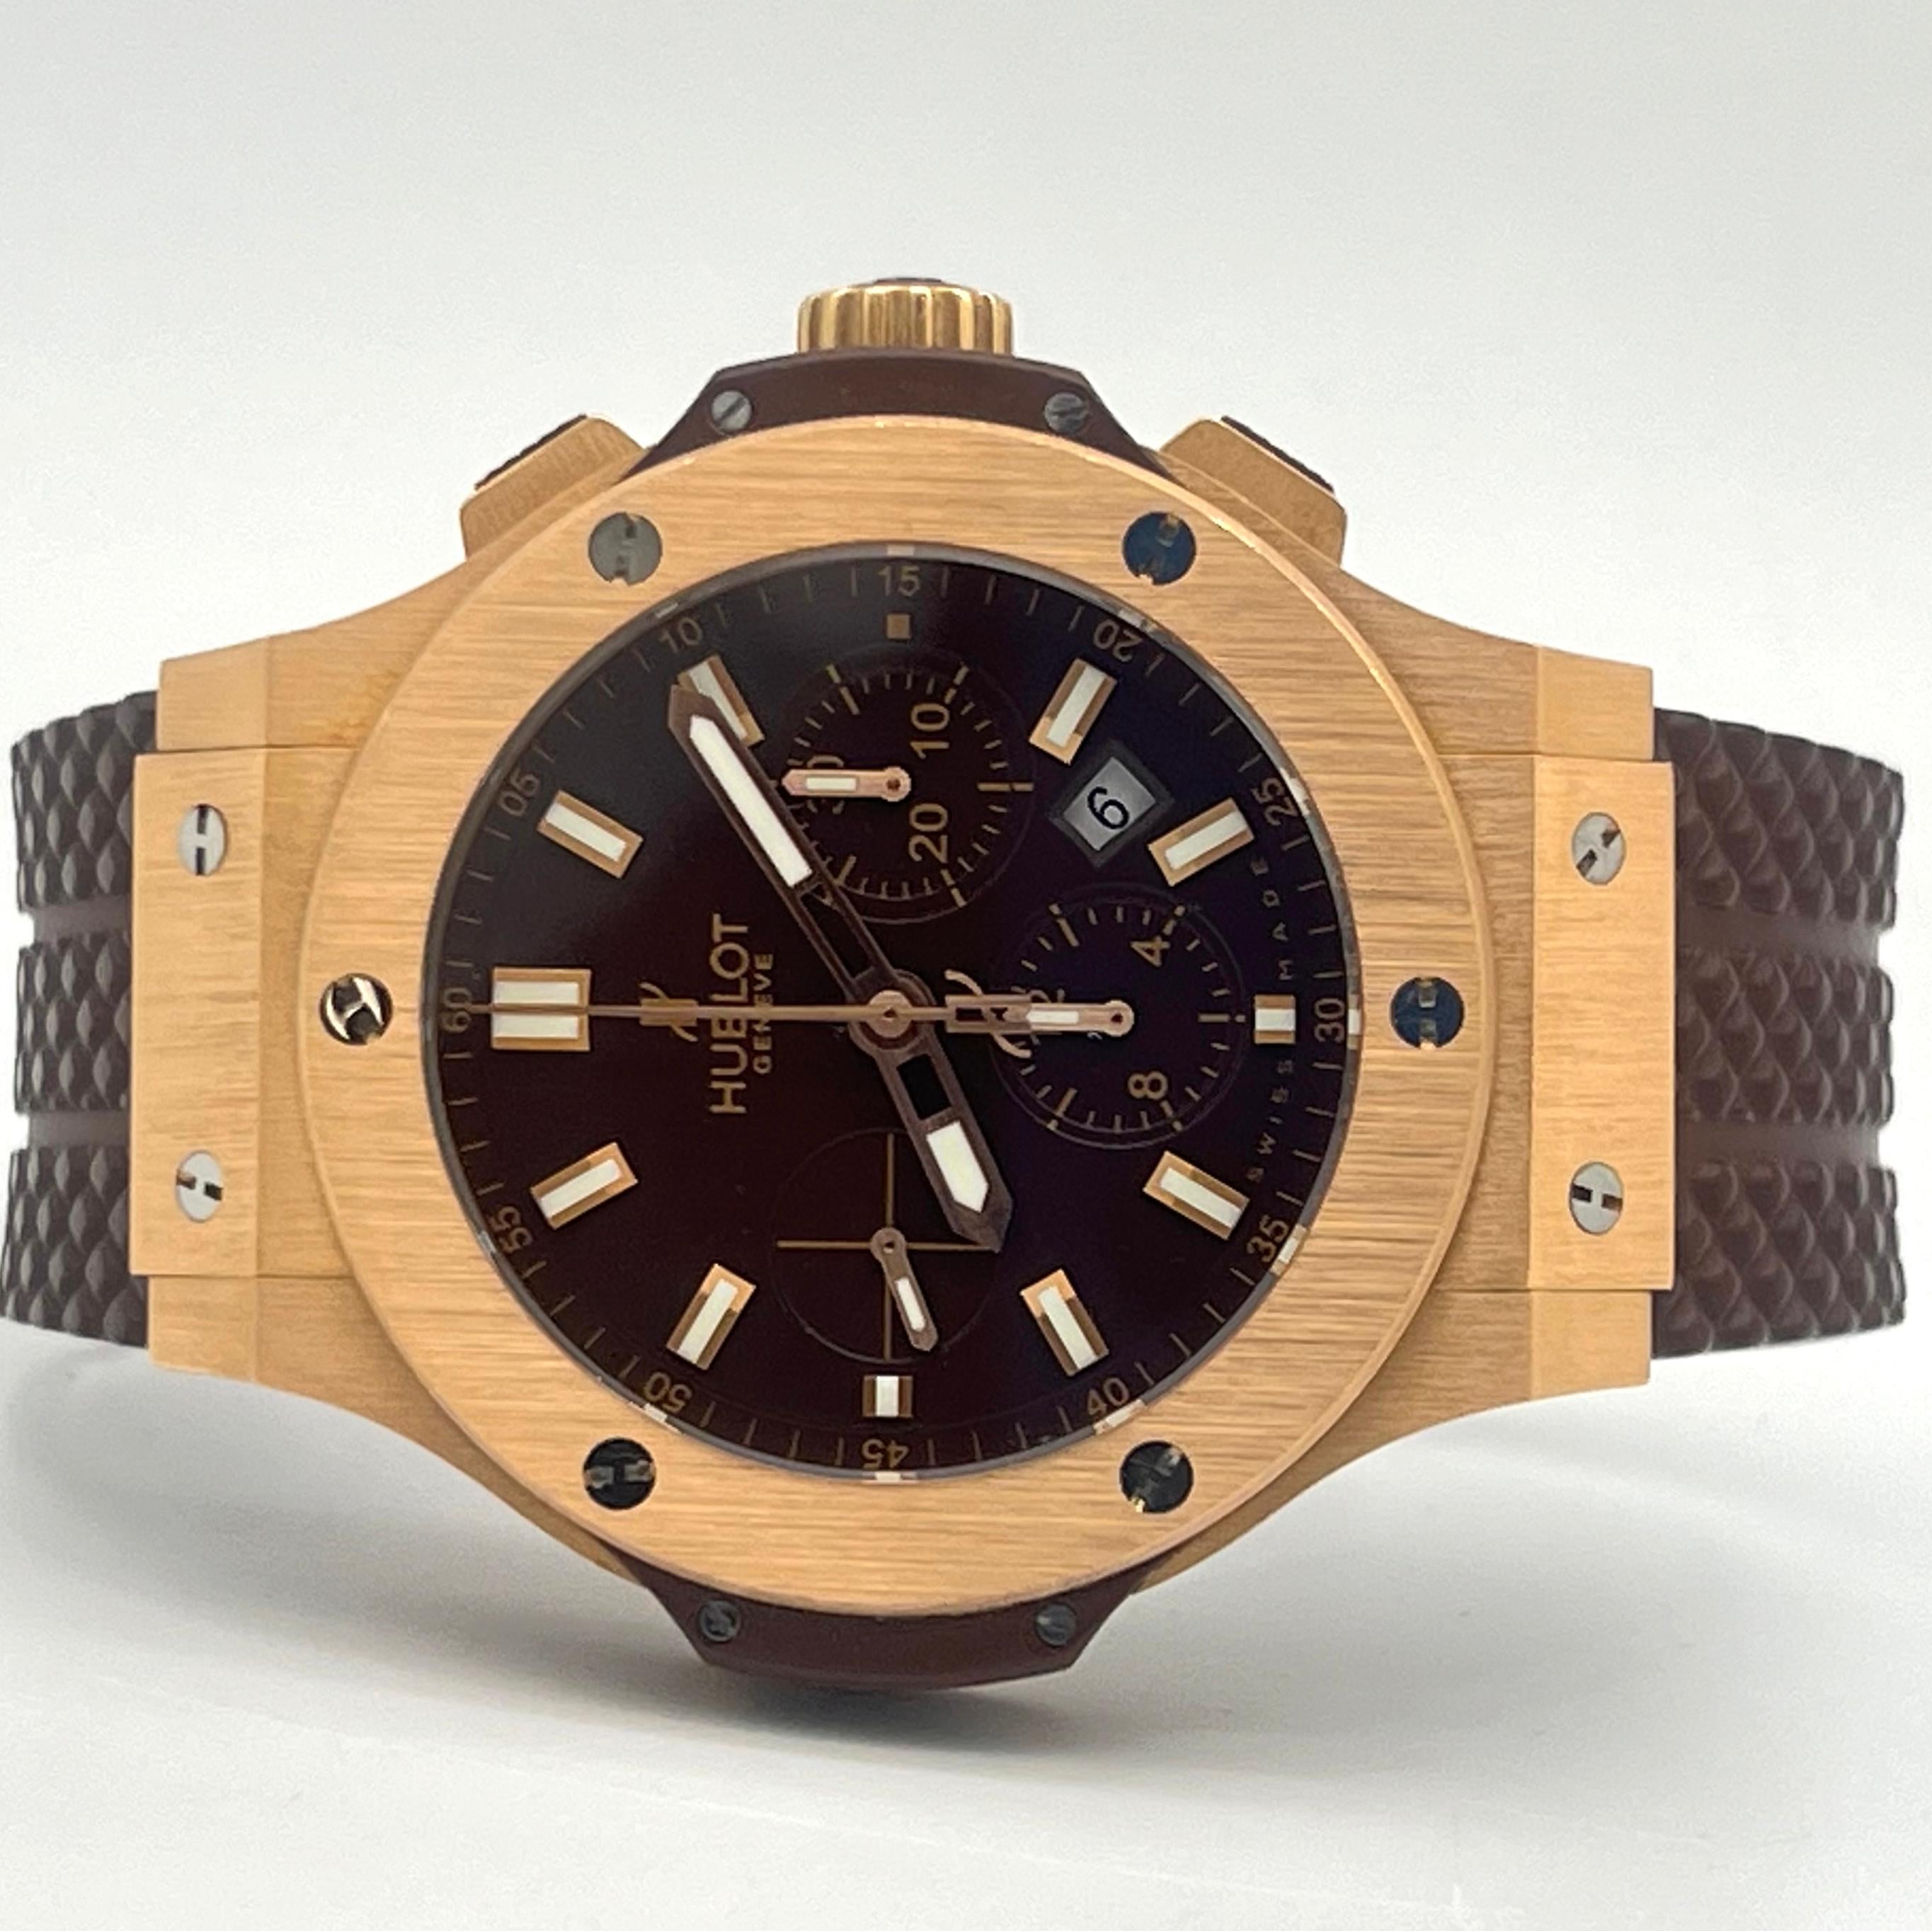 Hublot Style No: 301.PC.3180.RC
Hublot Big Bang Evolution Watch
44mm 18K red gold case, 18K red gold bezel, chocolate composite resin lateral inserts and bezel lugs, chocolate dial, self winding HUB 4100 movement with chronograph function,